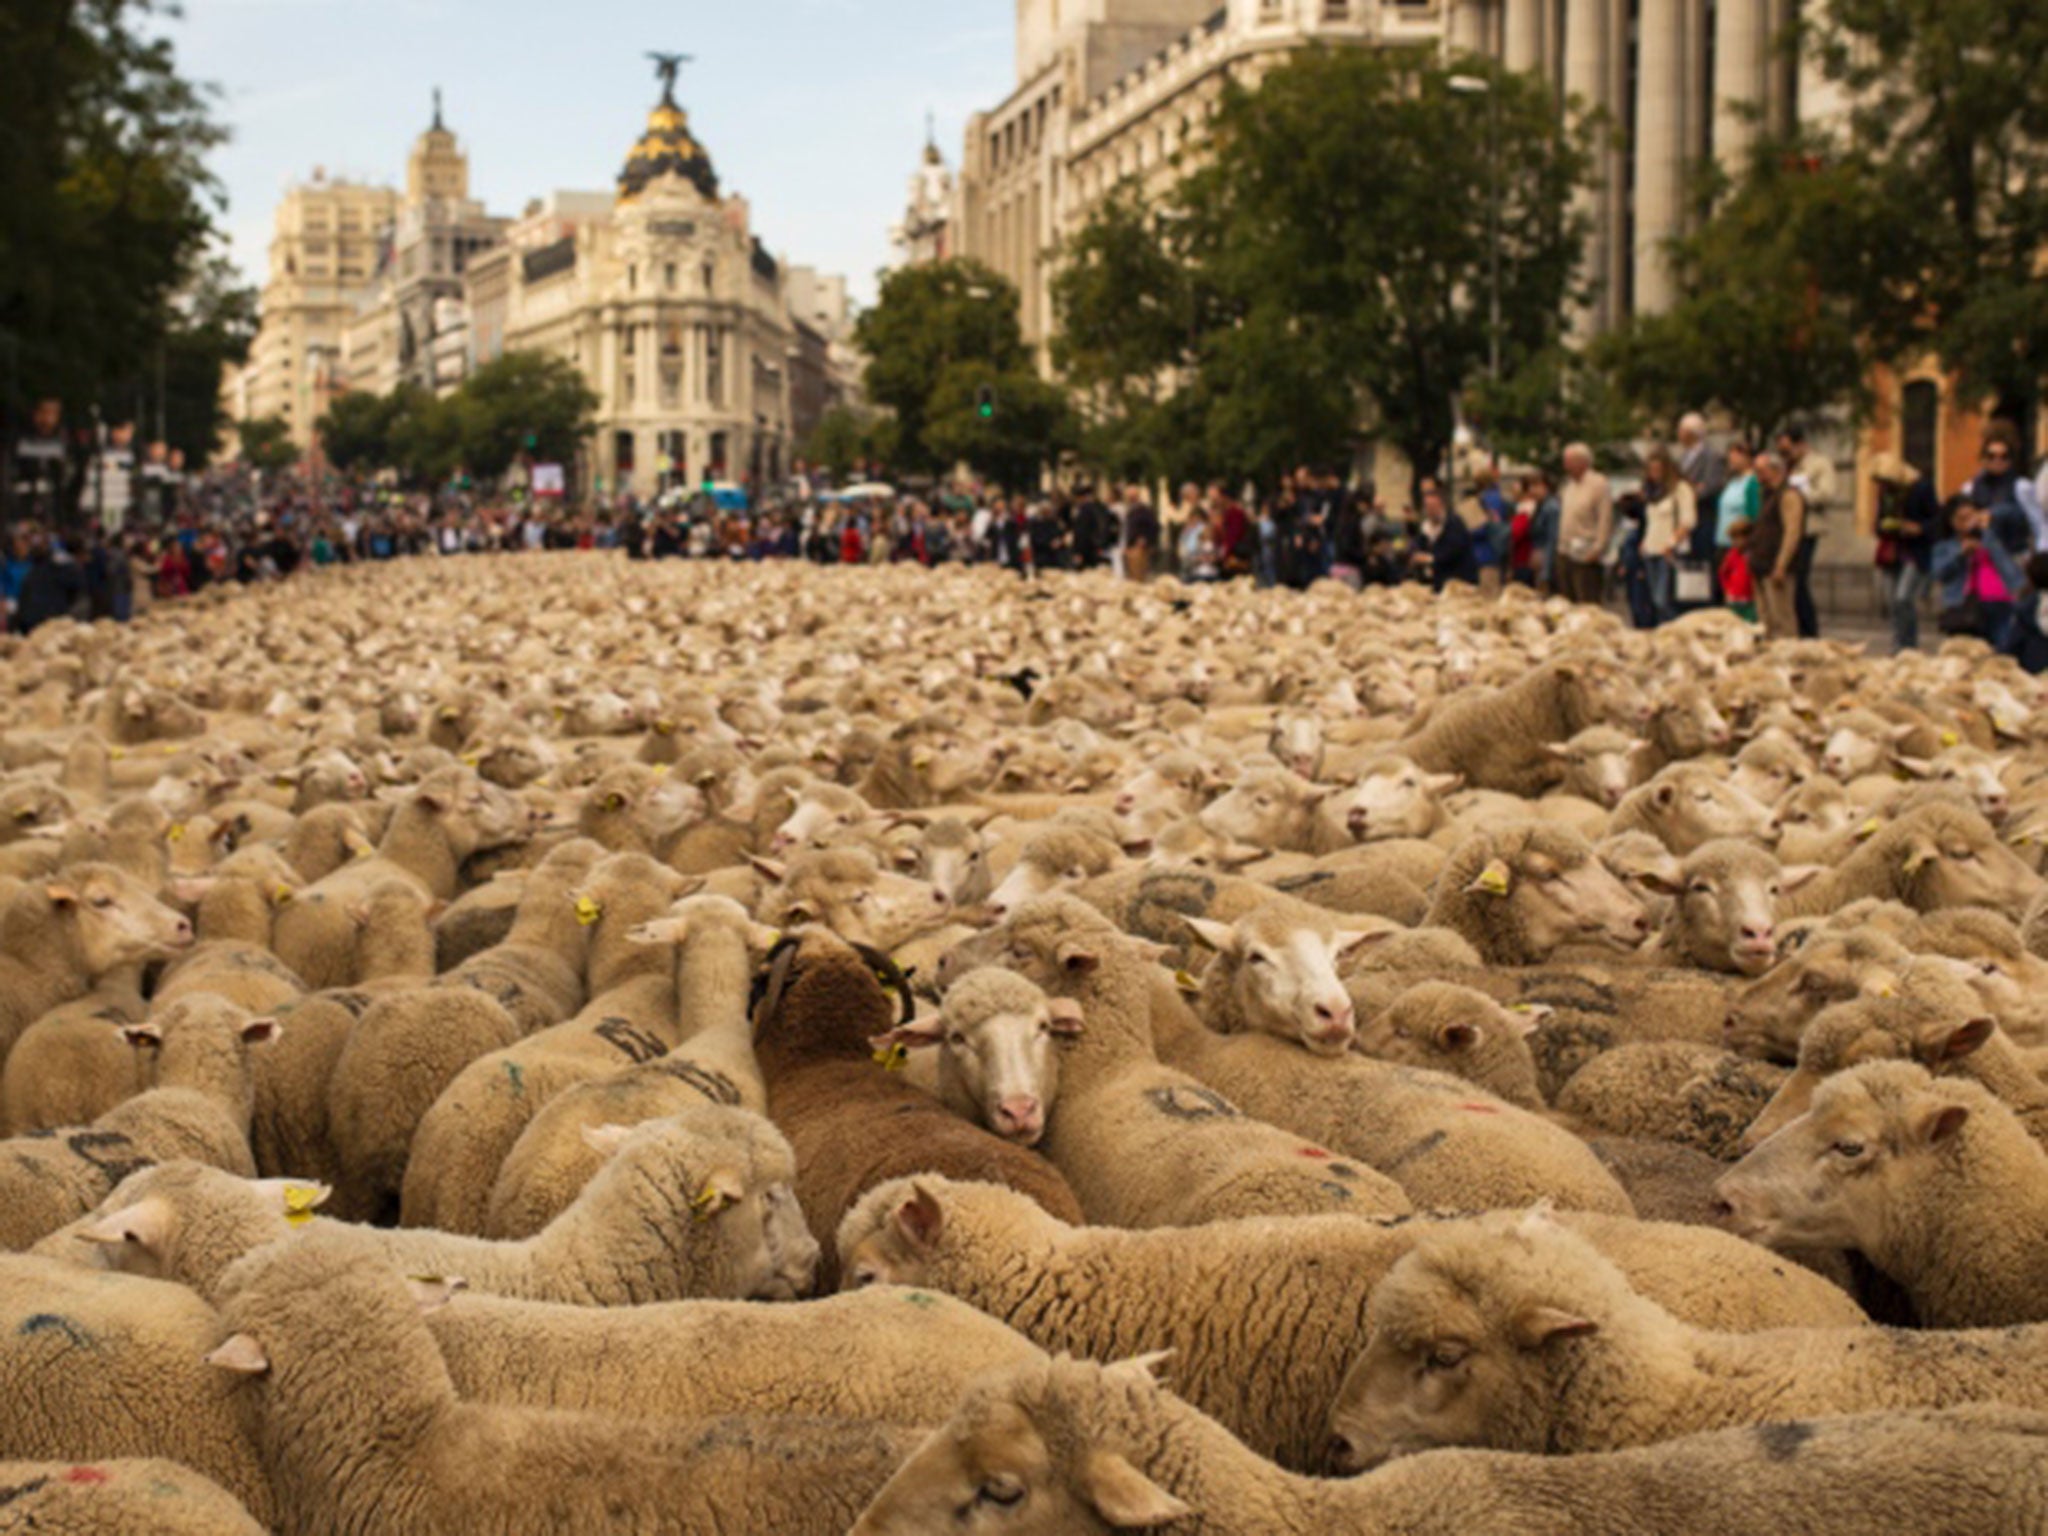 Nearly 2,000 sheep were herded through Madrid on Sunday